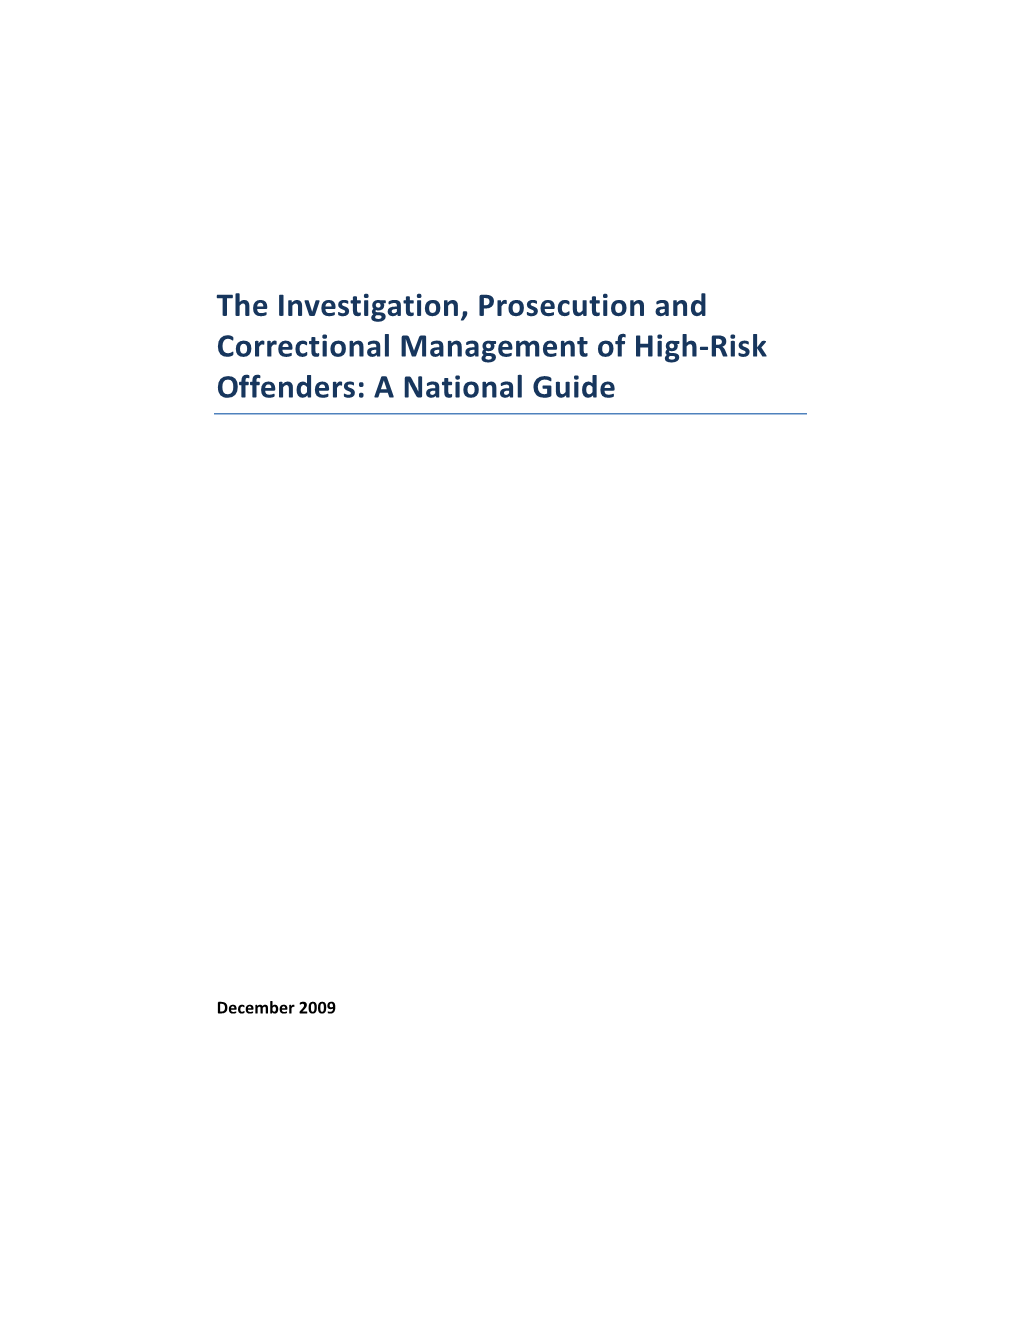 The Investigation, Prosecution and Correctional Management of High-Risk Offenders: a National Guide